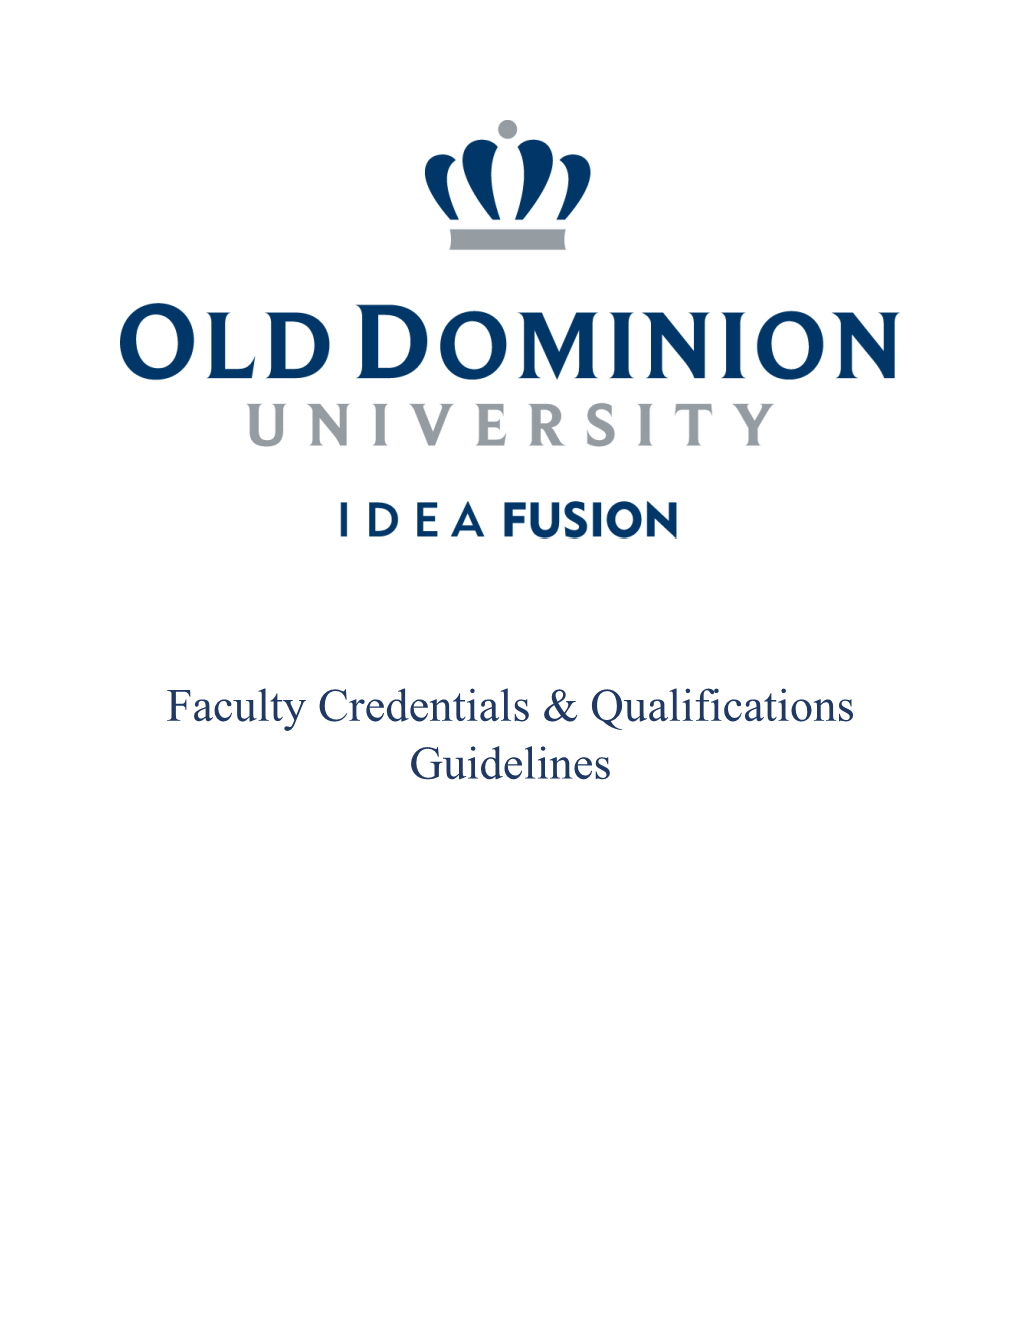 Faculty Credentials & Qualifications Guidelines